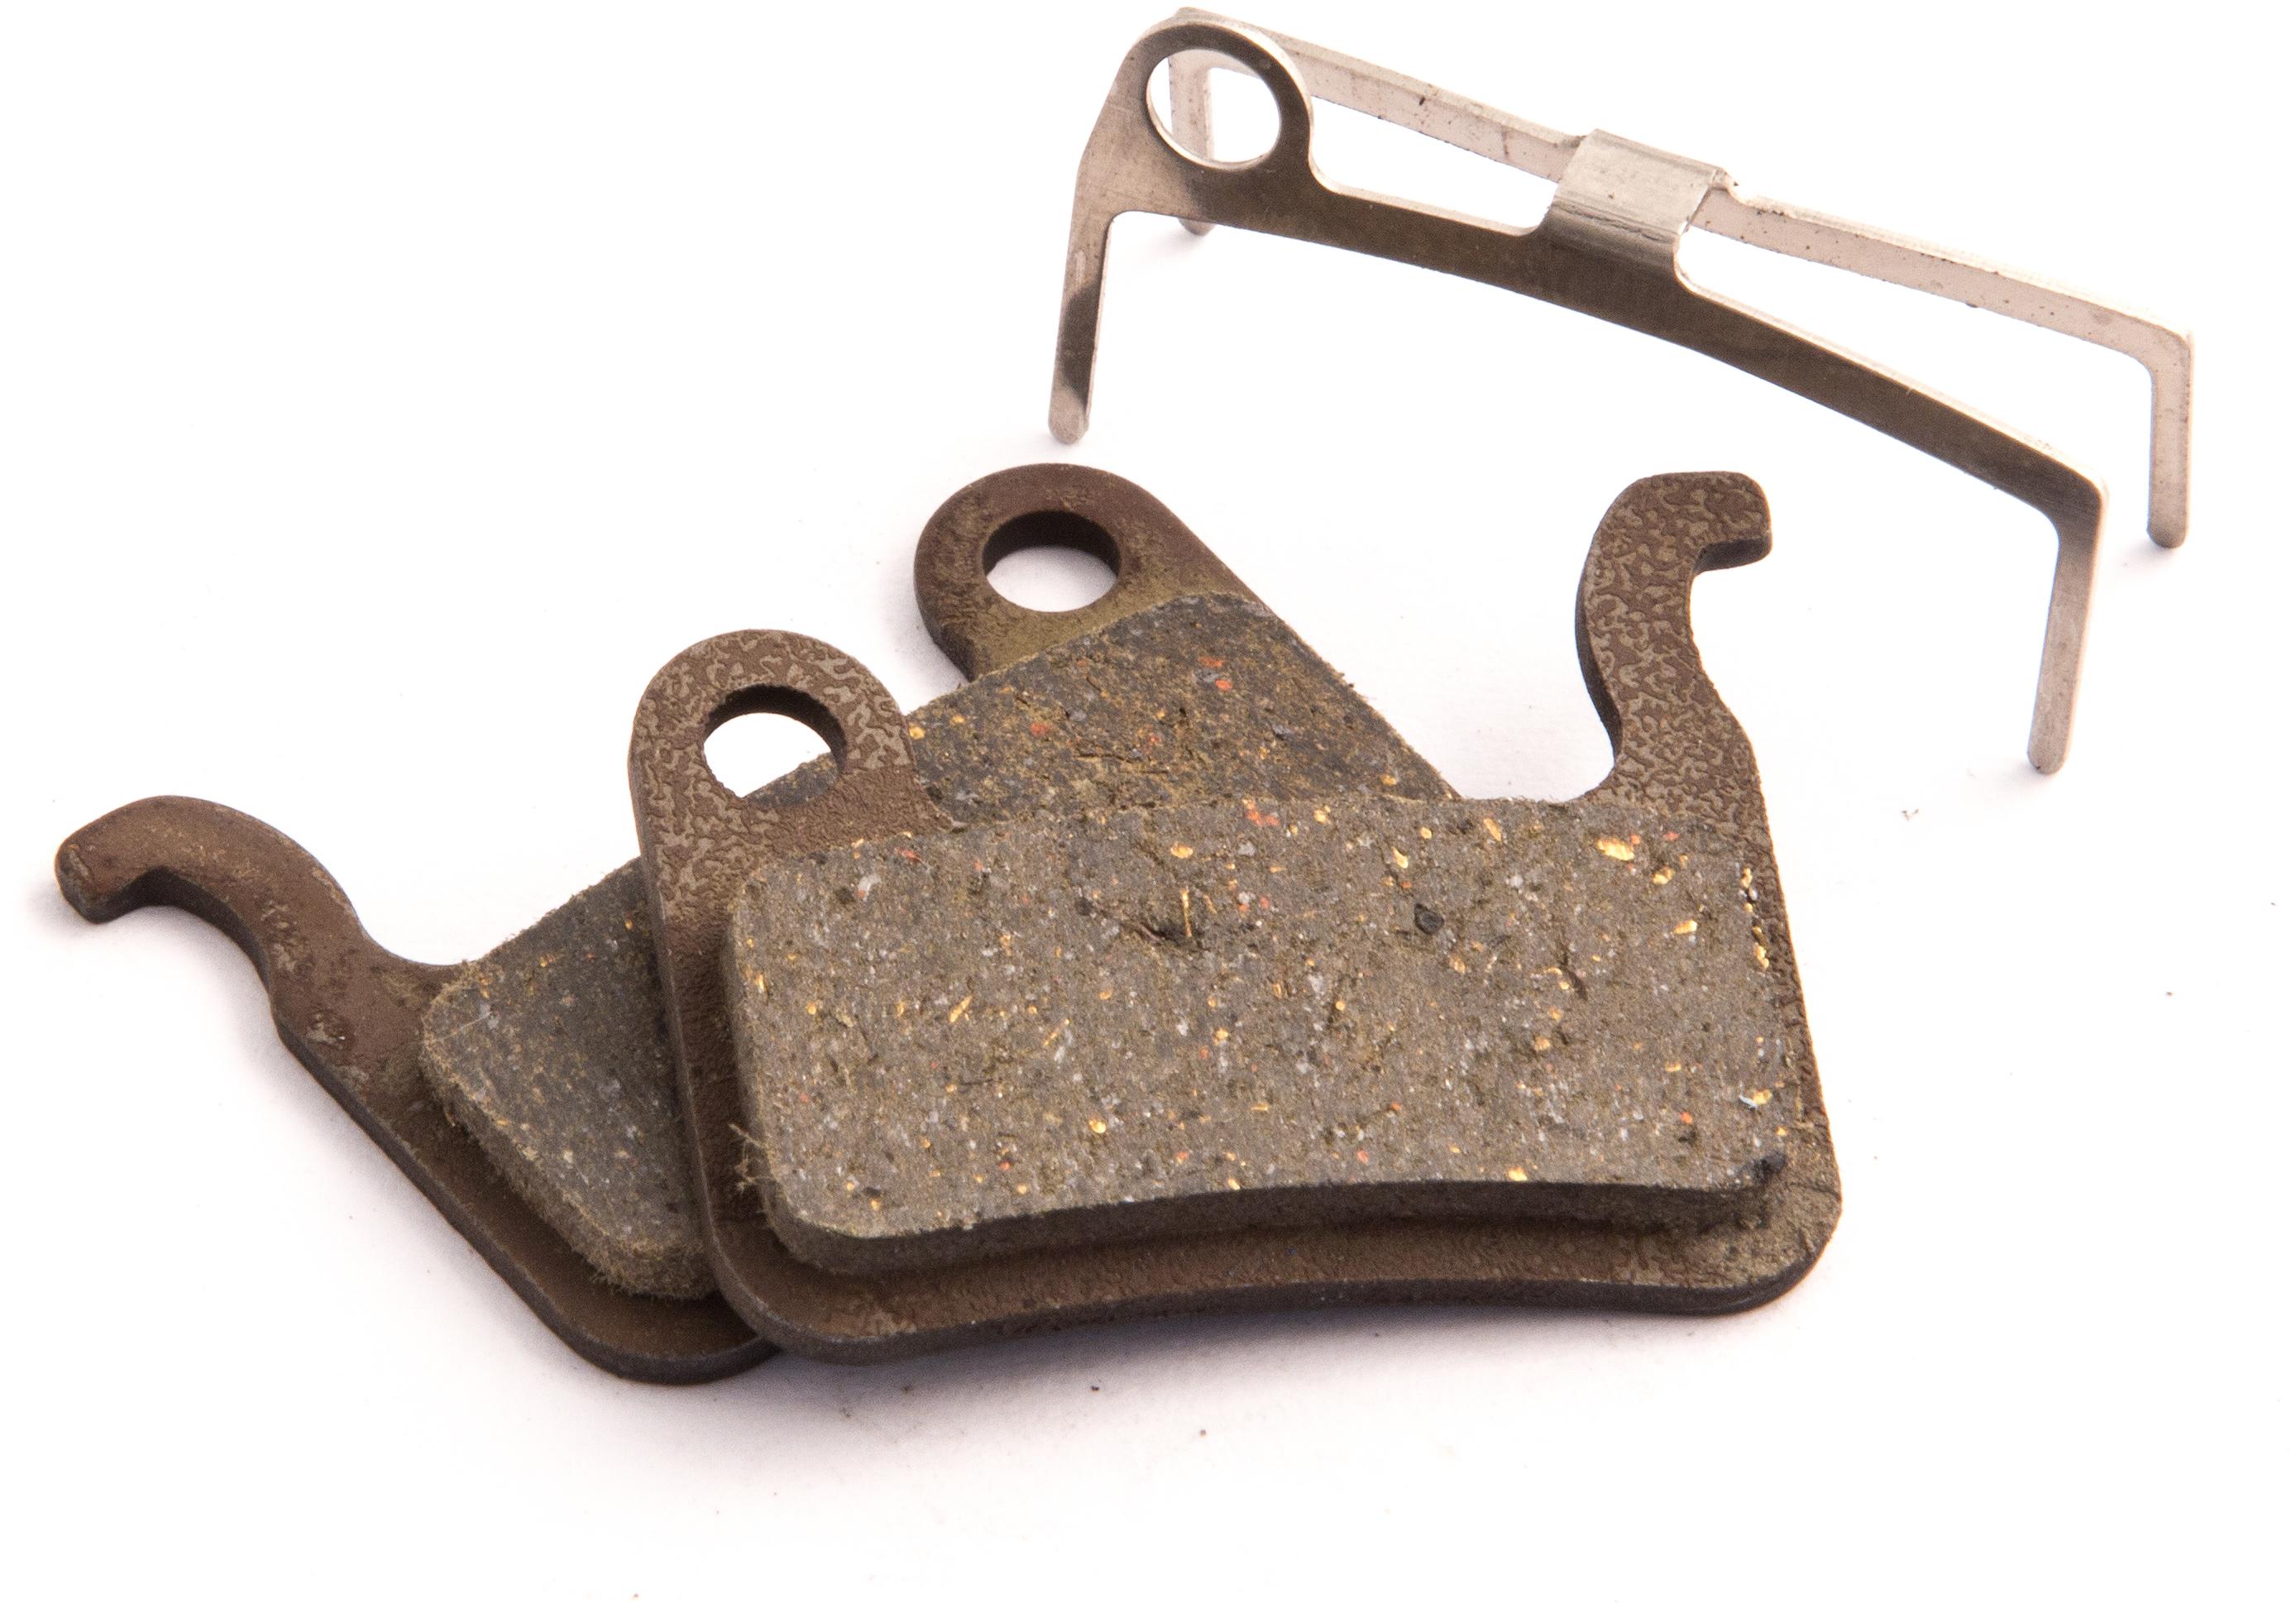 Clarks Shimano Cycle System Disc Brake Pads, Vx824C